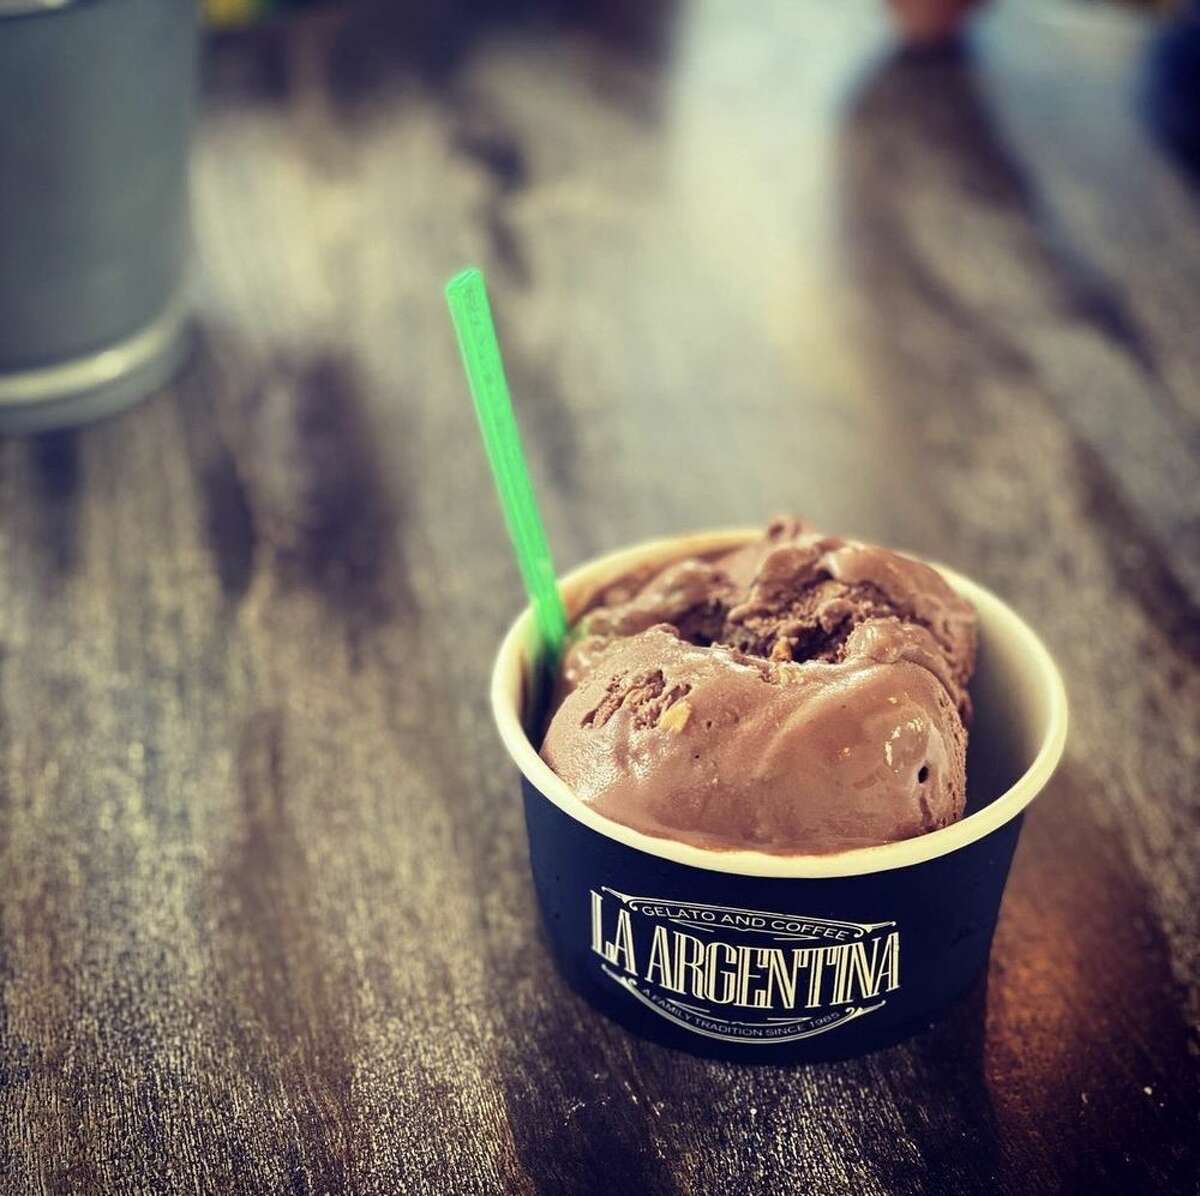 La Argentina is a family-owned gelato shop in Katy.